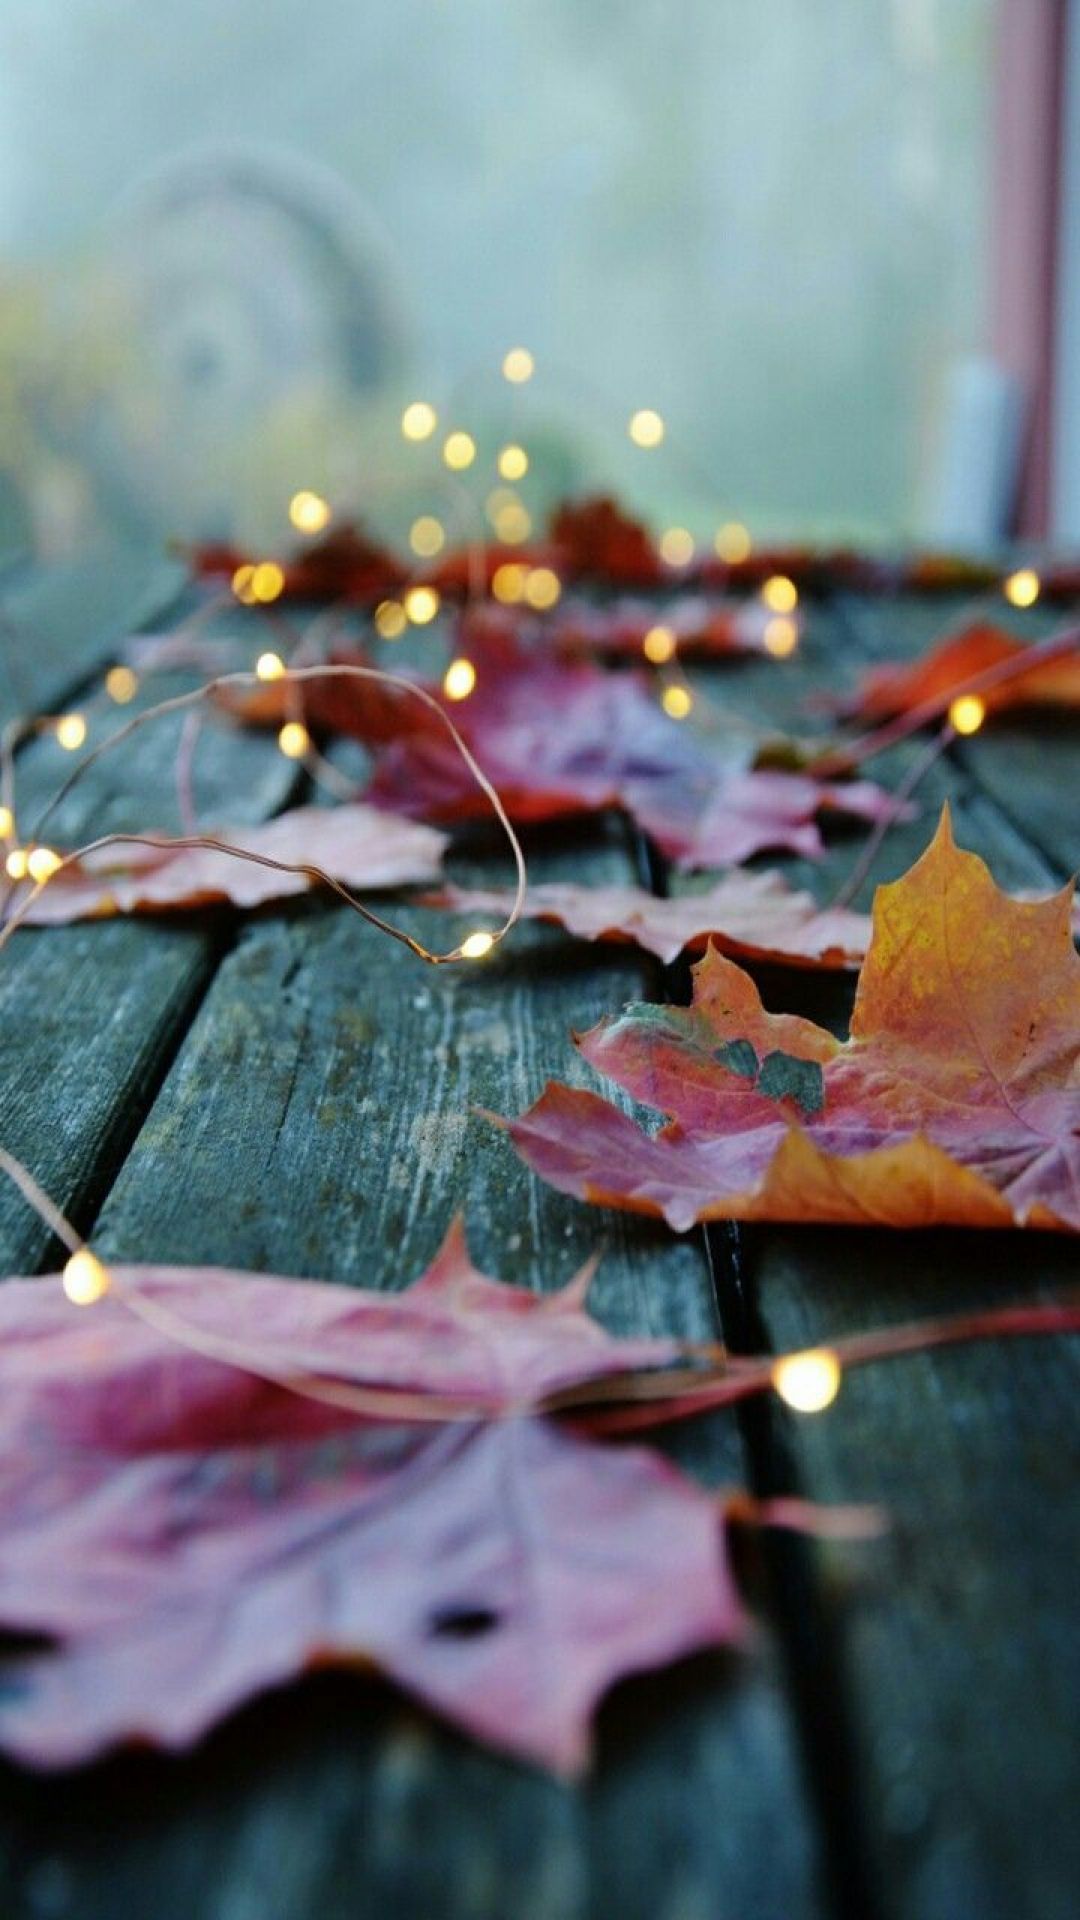 IPhone wallpaper of fall leaves on a wooden table with lights. - Cozy, fall iPhone